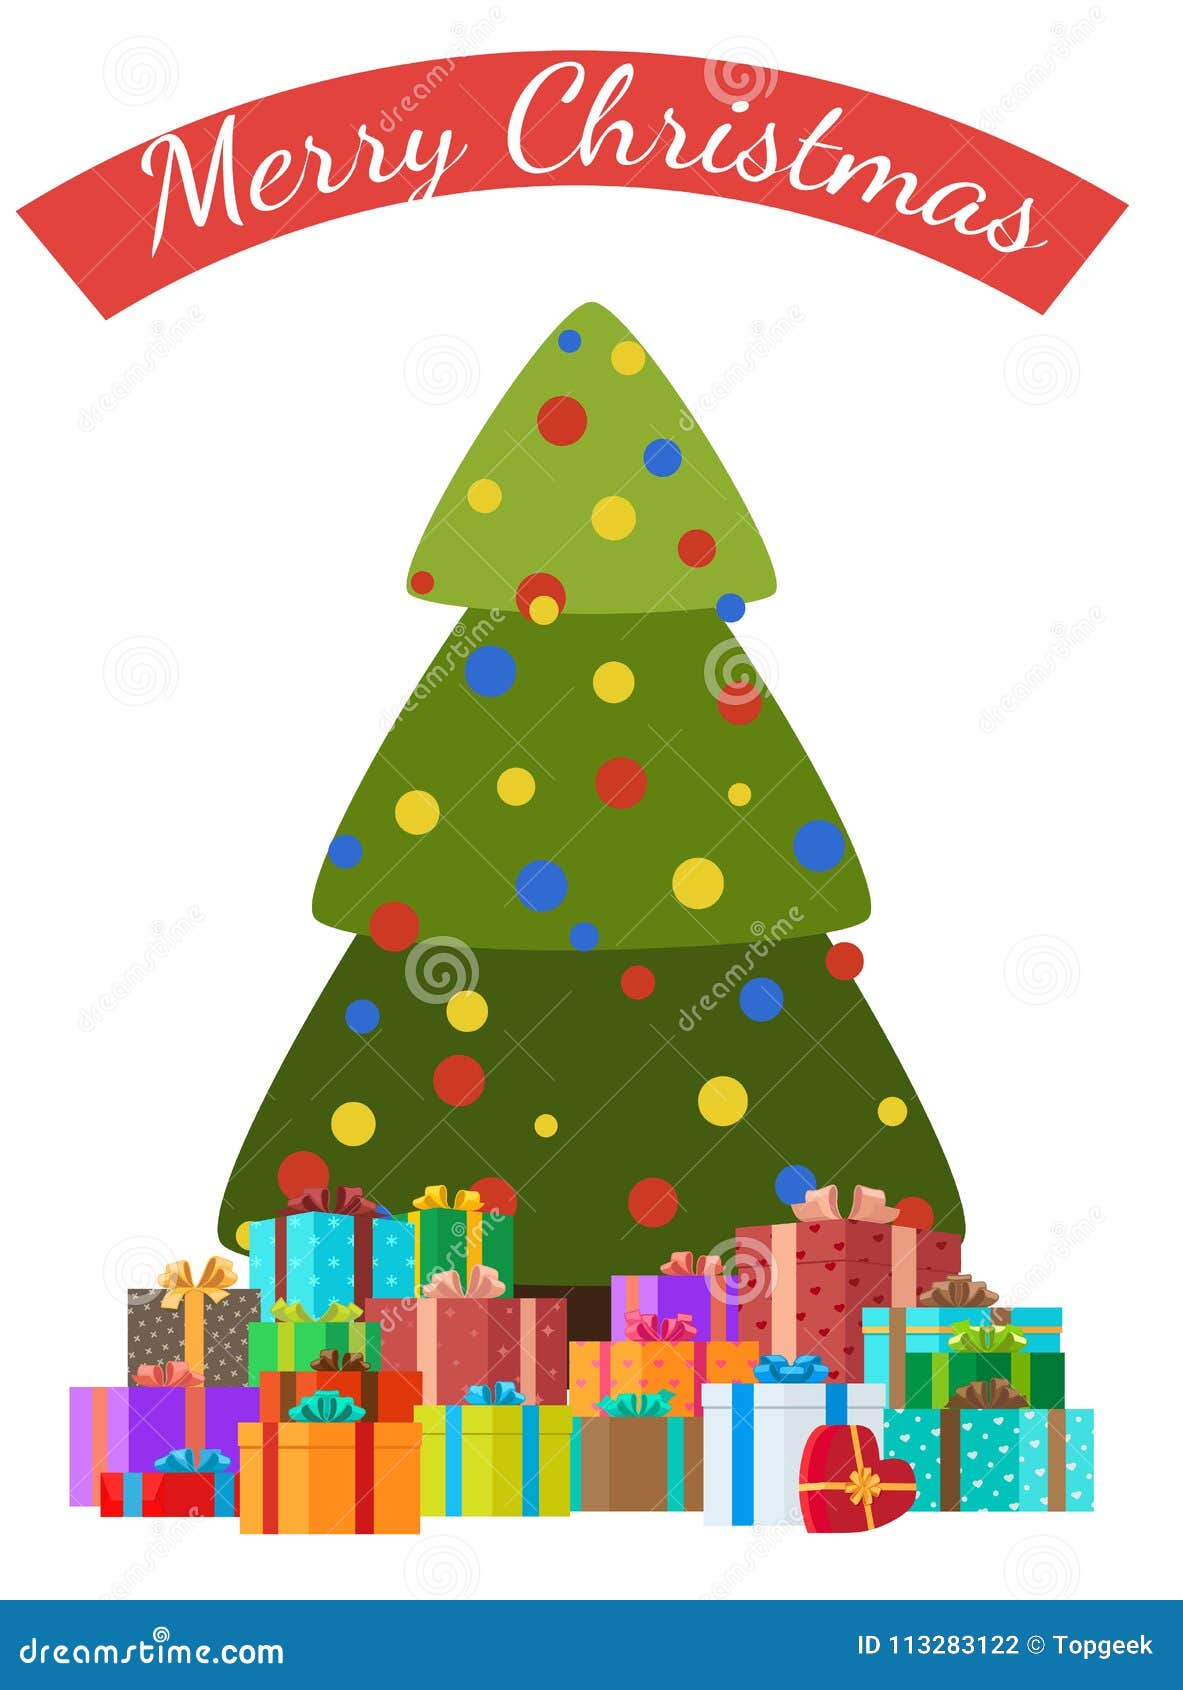 Merry Christmas Poster Decoated Tree and Presents Stock Vector ...